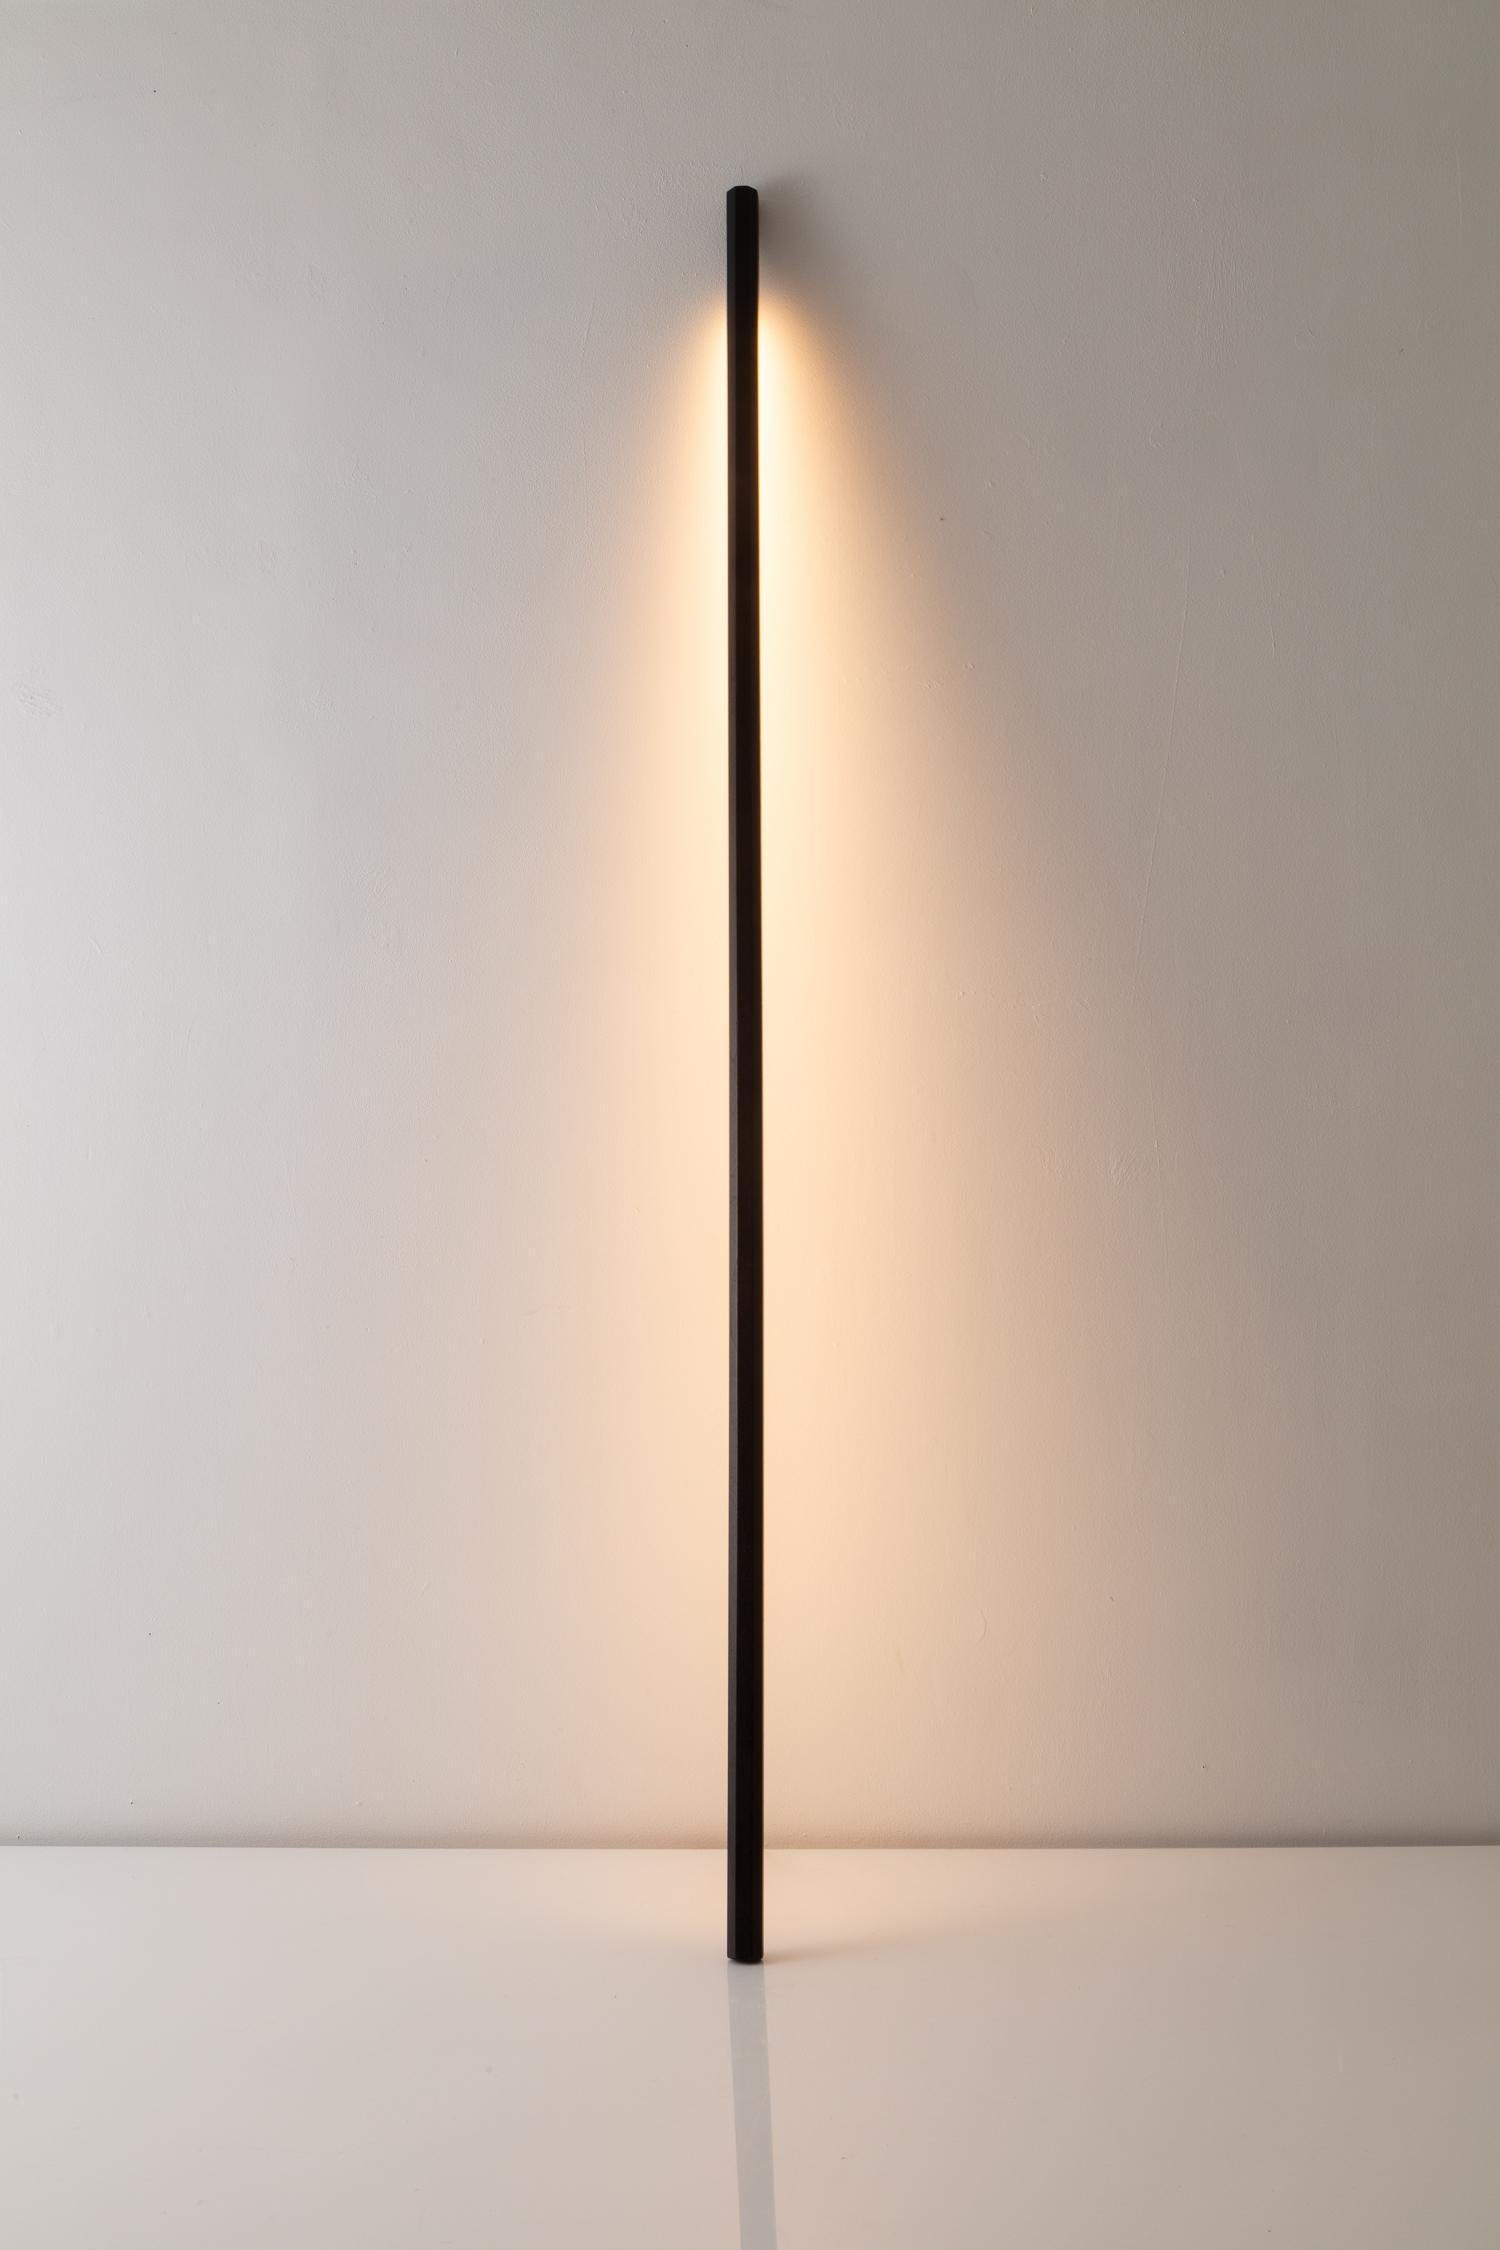 Fort Makers' walnut line light is made in Brooklyn by Noah Spencer. This sculptural LED light juxtaposes hard lines with soft reflected light and emits an ambient aura. The lifespan of an LED strip is approximately 50,000 hours.
12 Volts LED light,